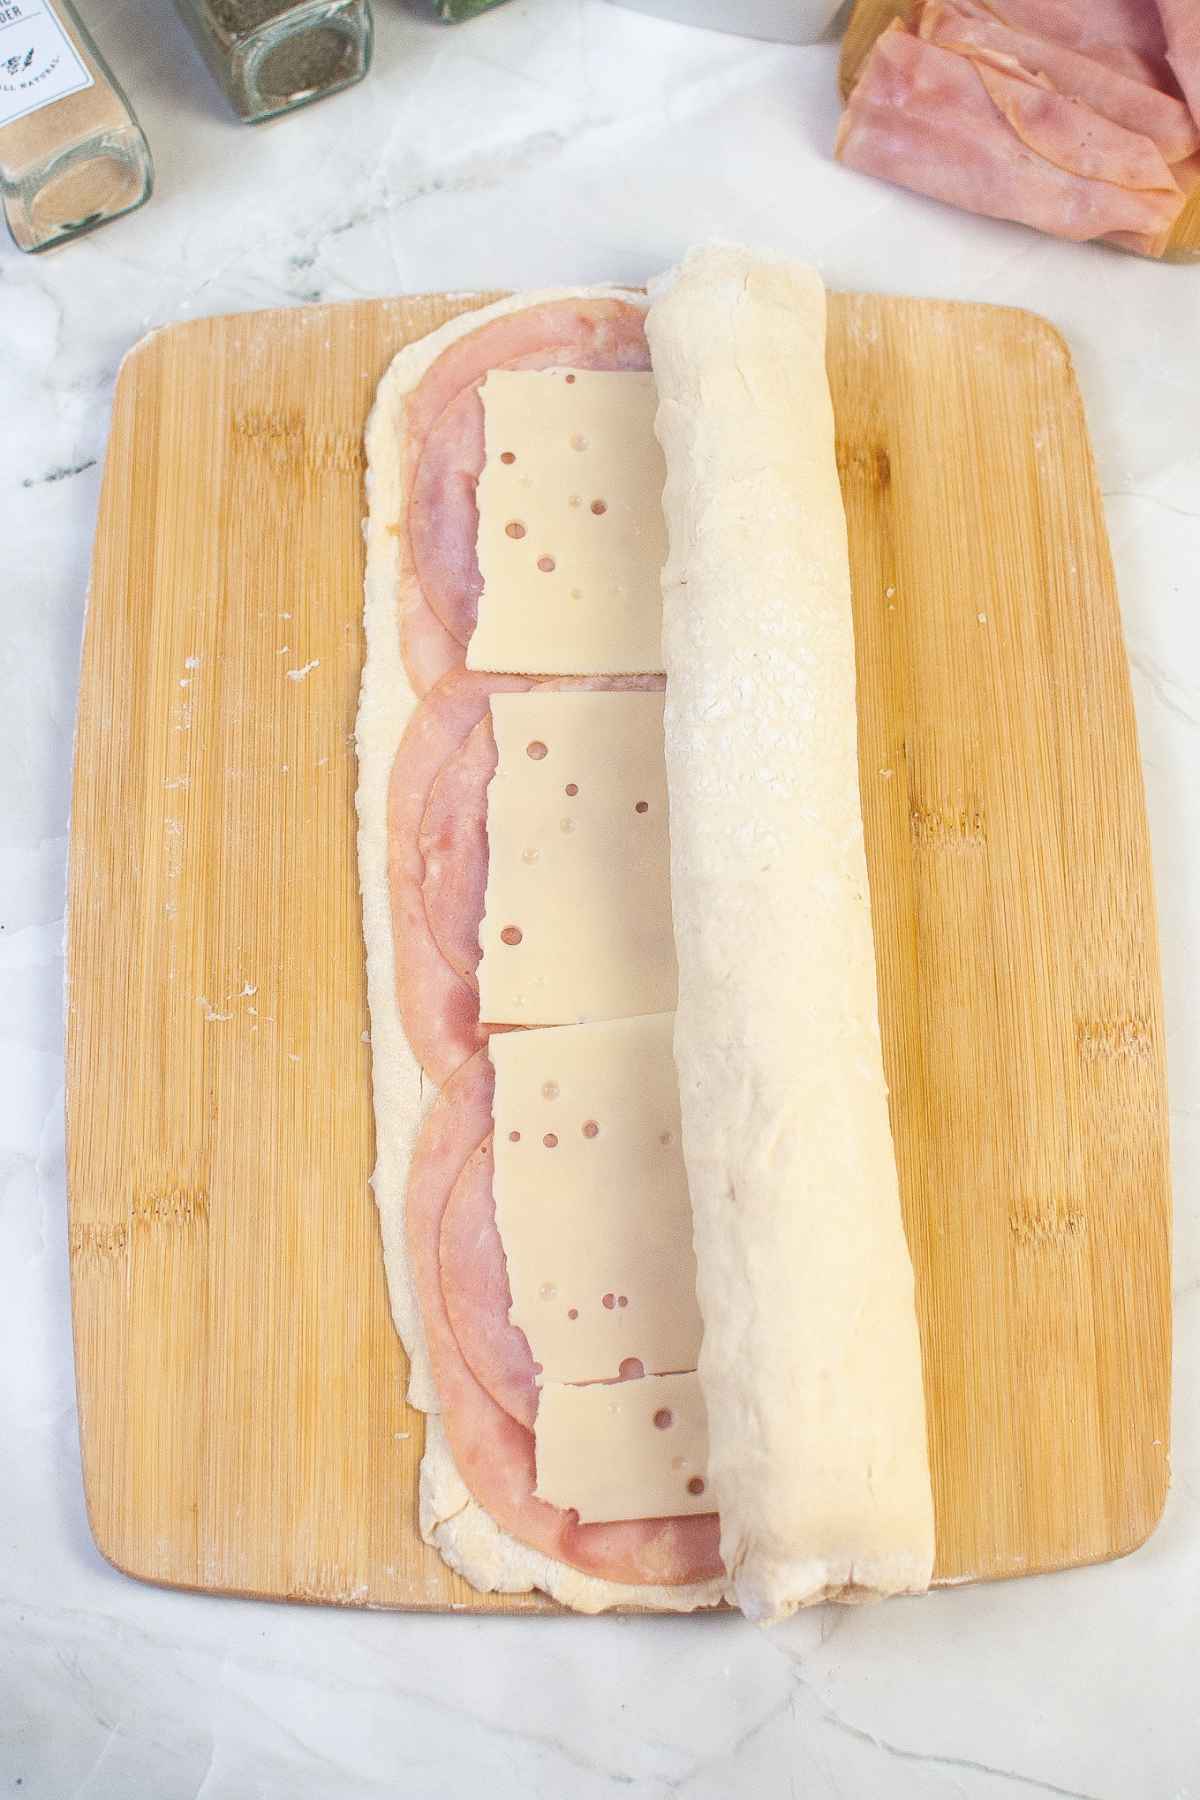 Ham and cheese on pastry being rolled up on a wood board.